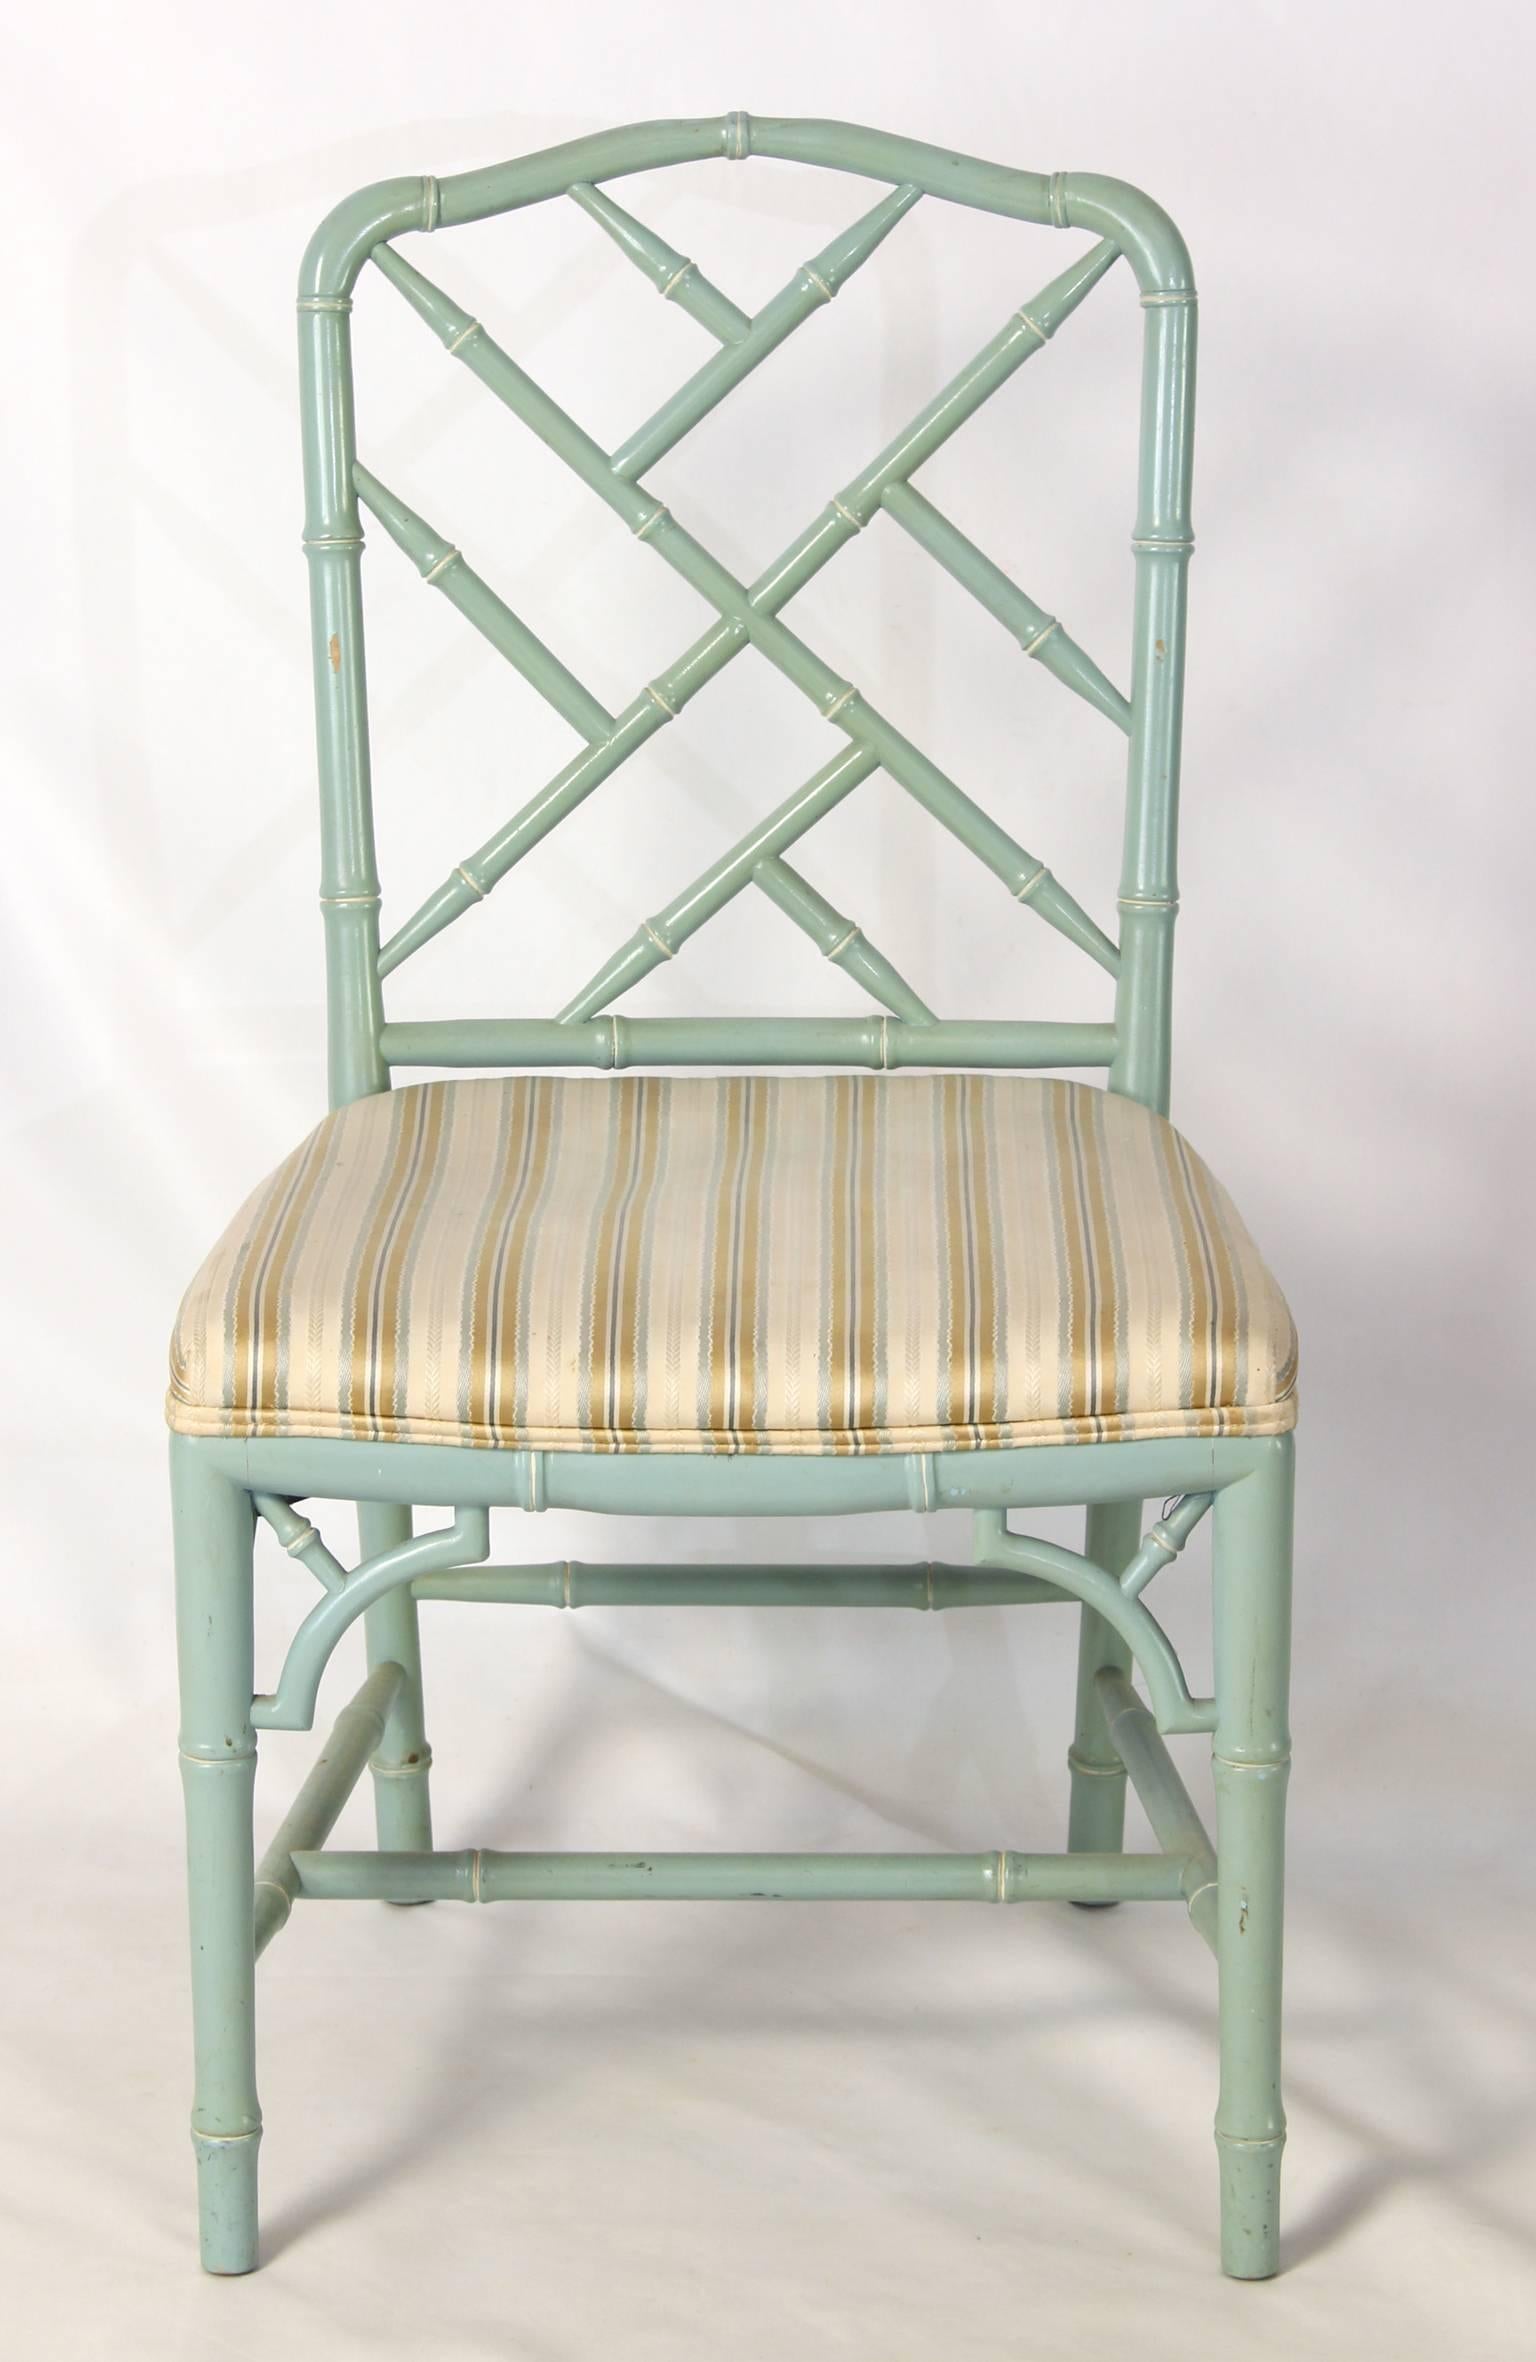 A stunning set of ten robin's egg blue Chinese Chippendale dining chairs of good design and sturdy construction with arched back and bracketed front legs. The close up image of the leg shows the most accurate color representation.